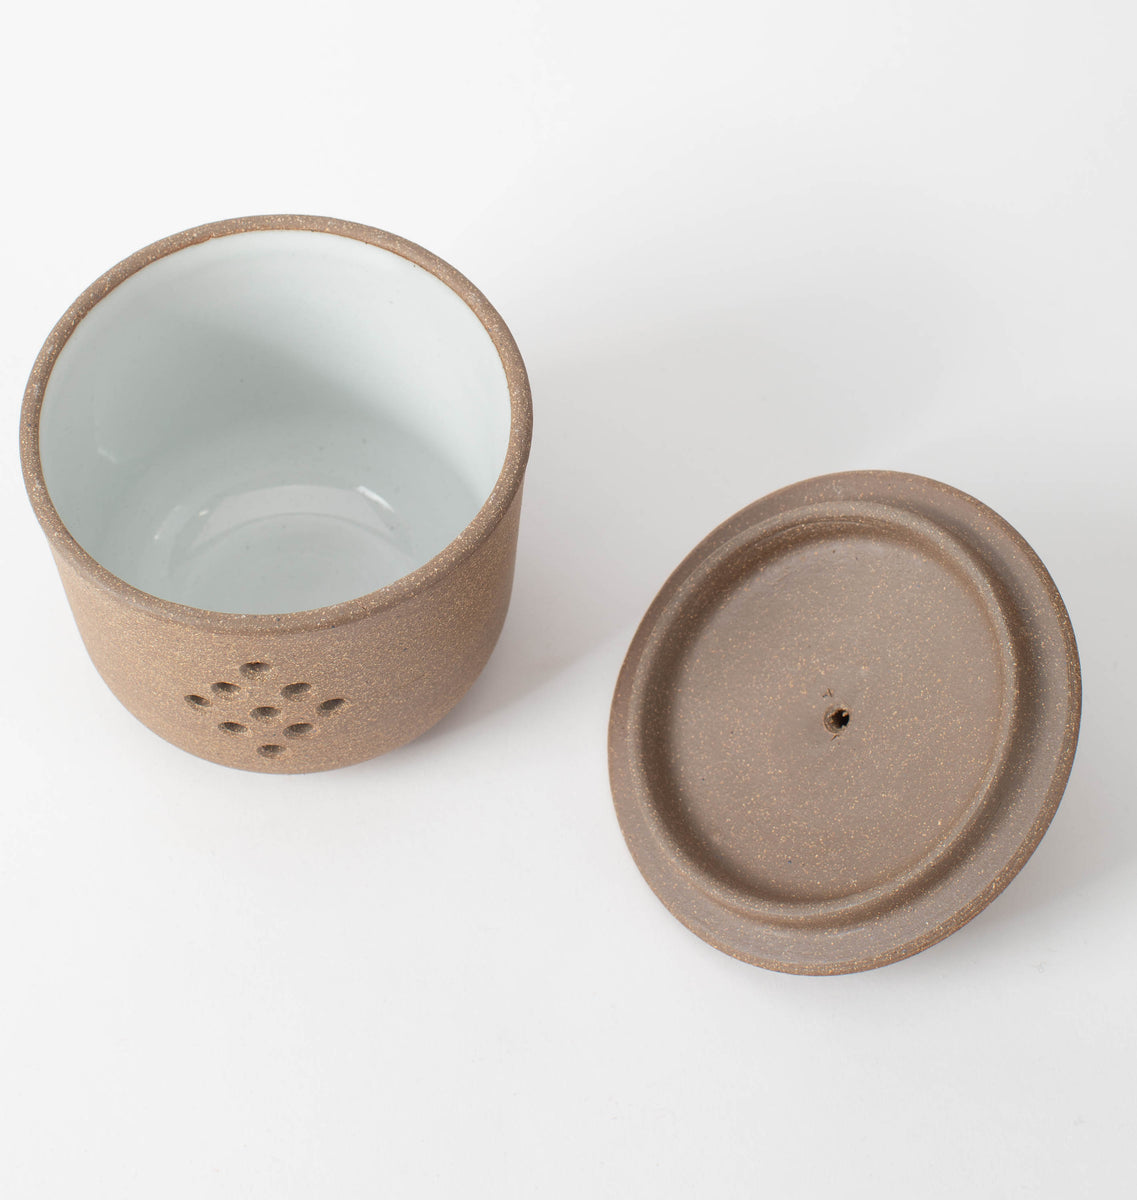 Sawyer Ceramics French Ceramic Butter Keeper on Food52